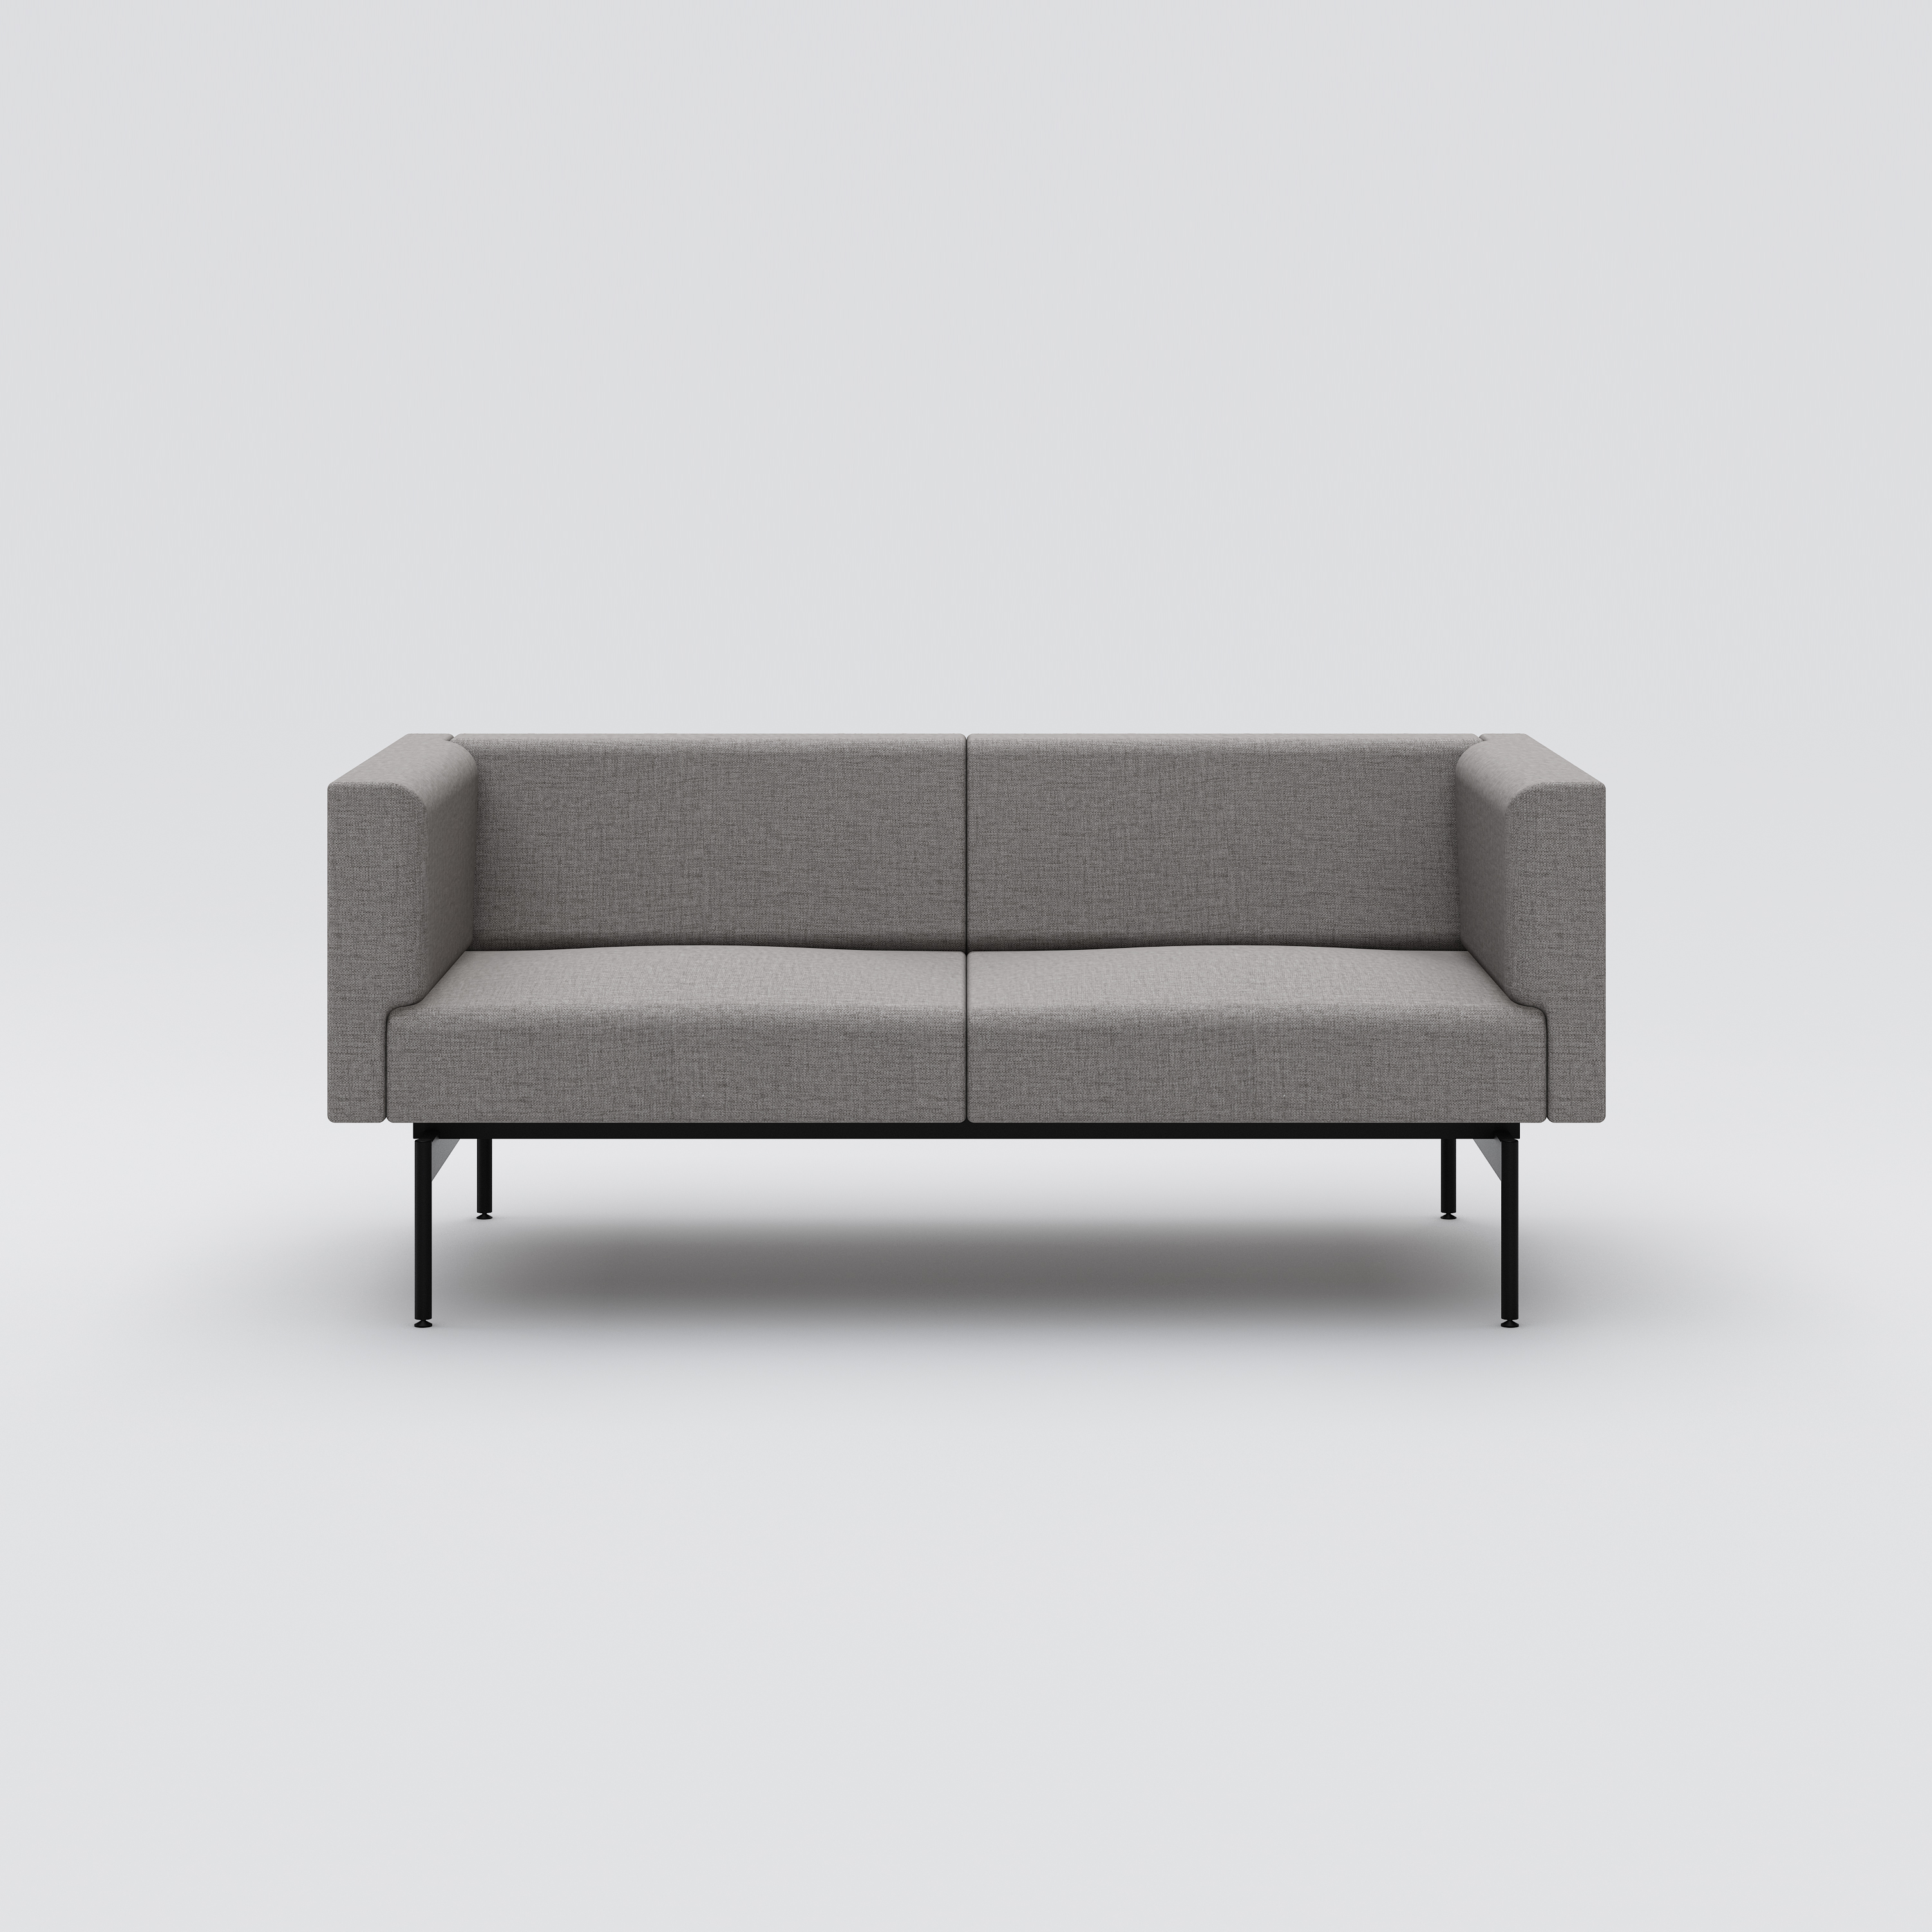 Sofa 2-seater Sans, black metal stand, gray-beige upholstery